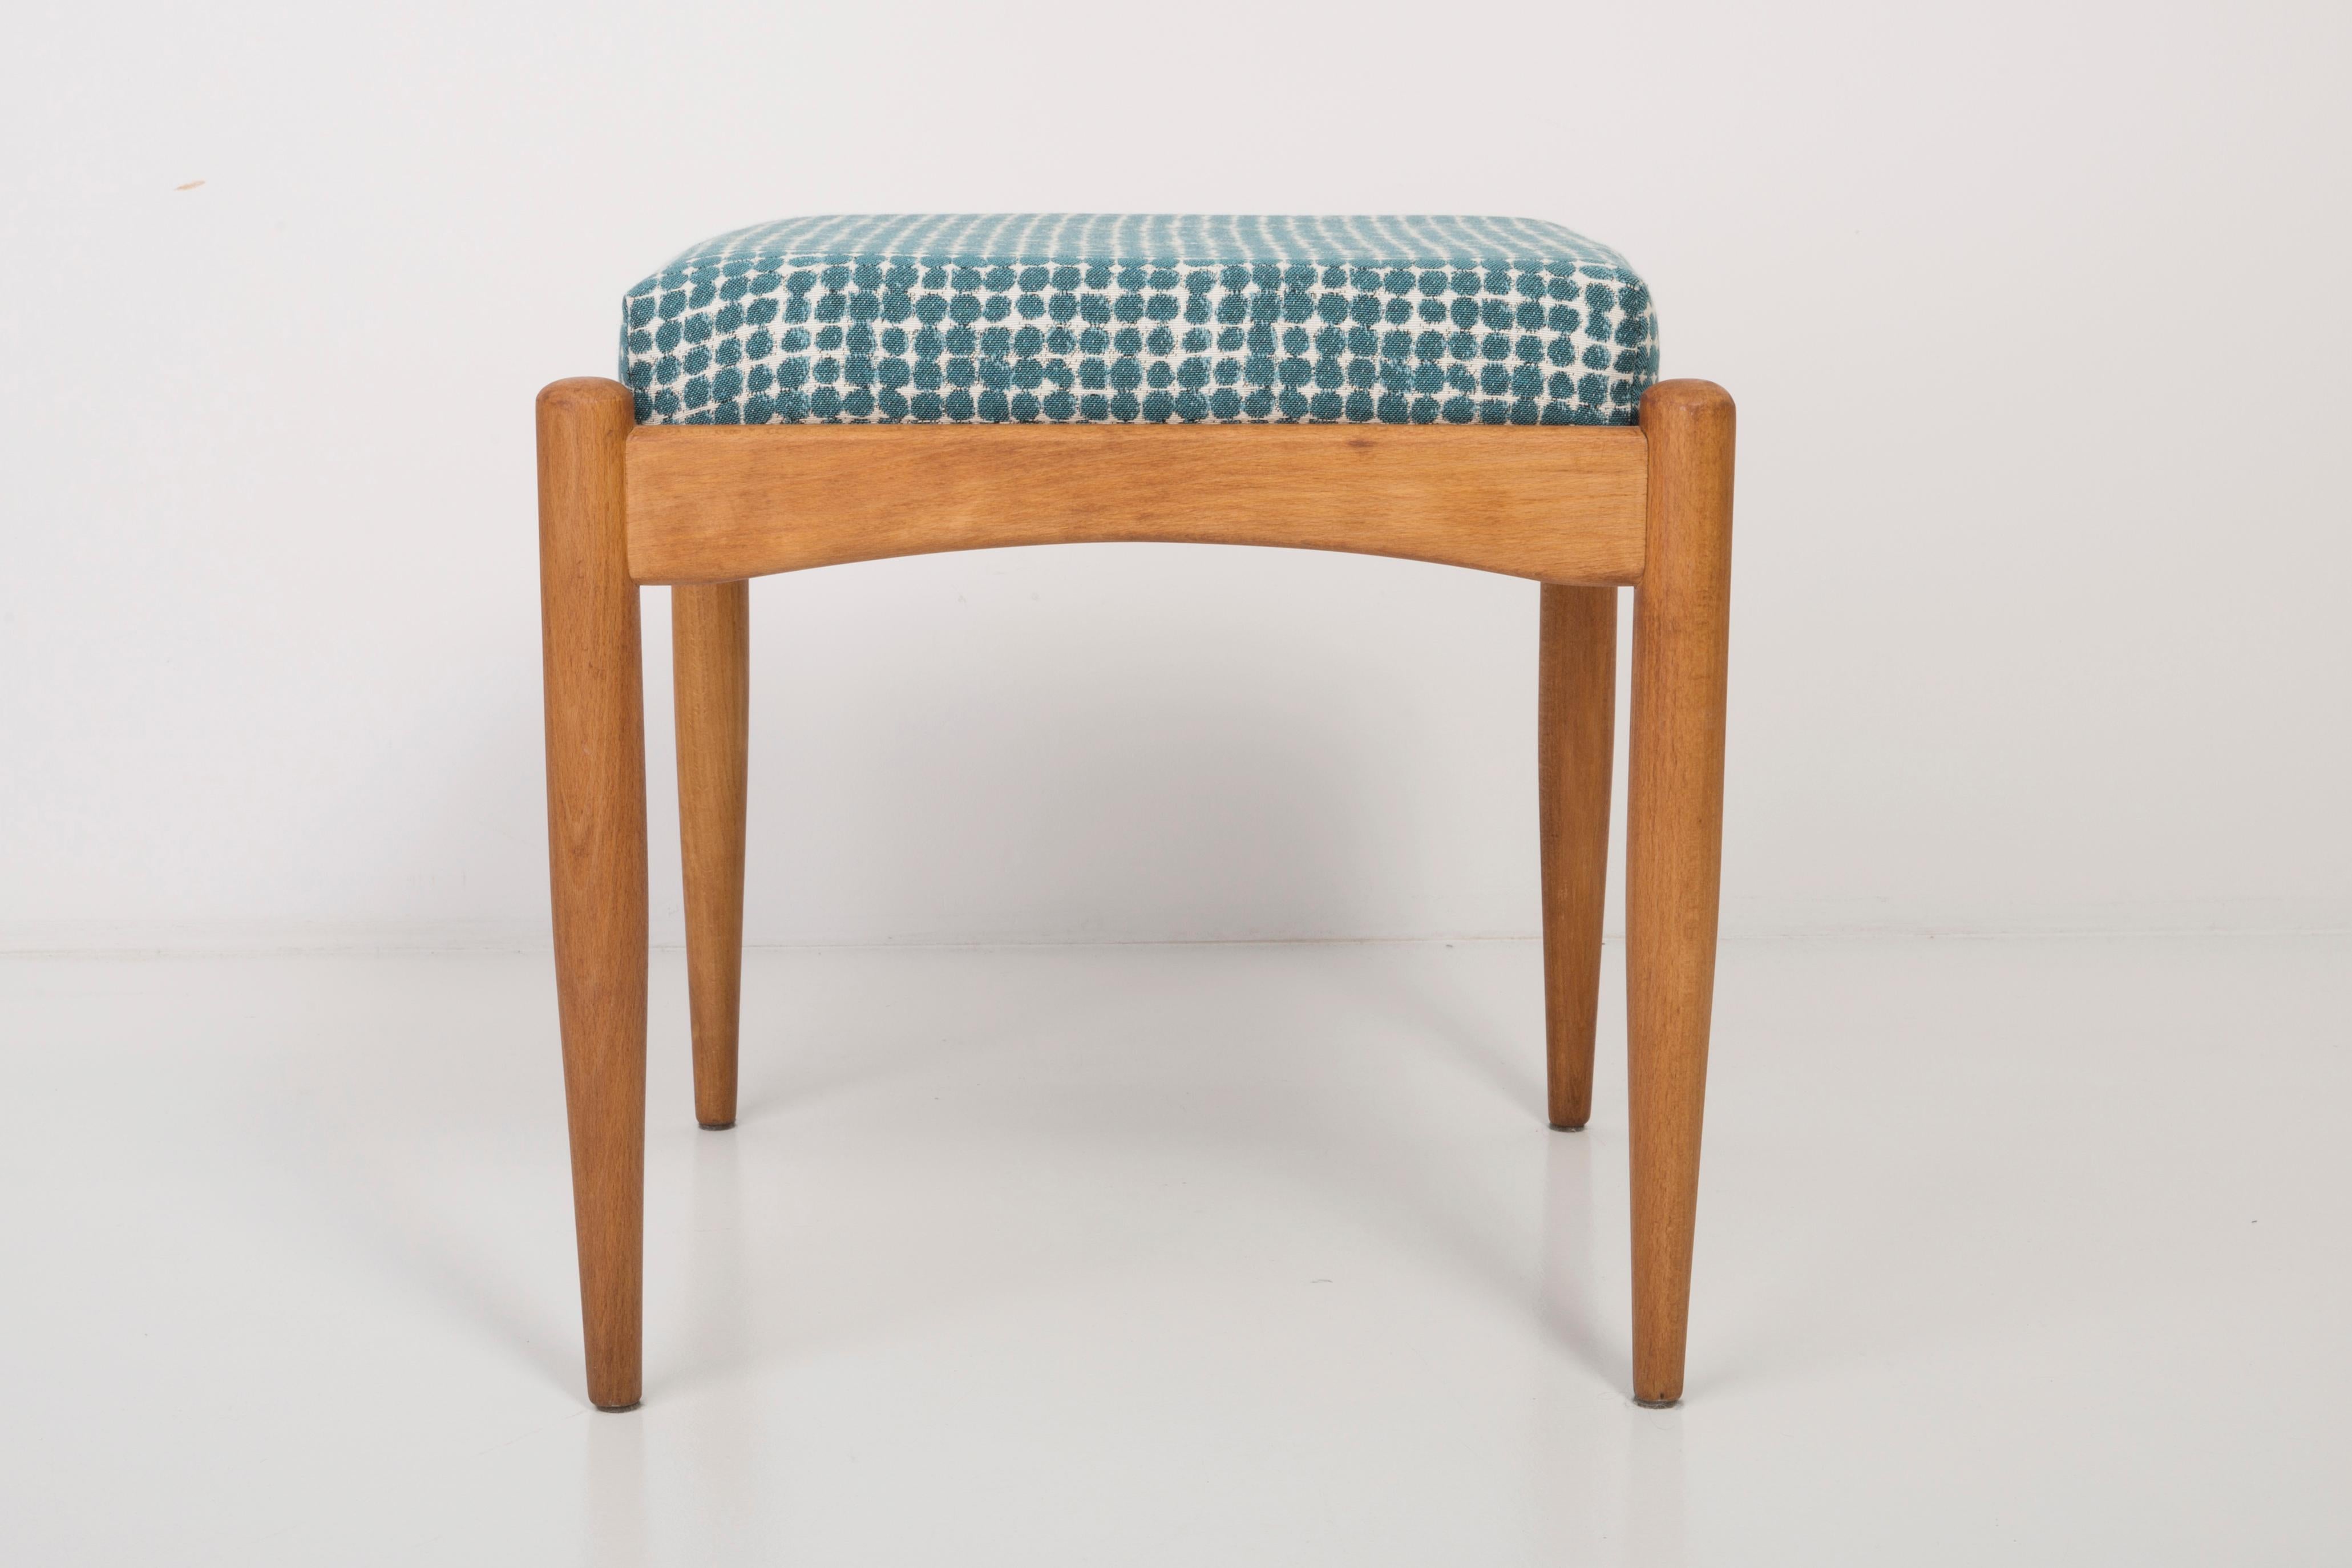 Stool from the turn of the 1960s and 1970s. Beautiful green and white pattern upholstery. The stool consists of an upholstered part, a seat and wooden legs narrowing downwards, characteristic of the 1960s style. We can prepare this stool also in